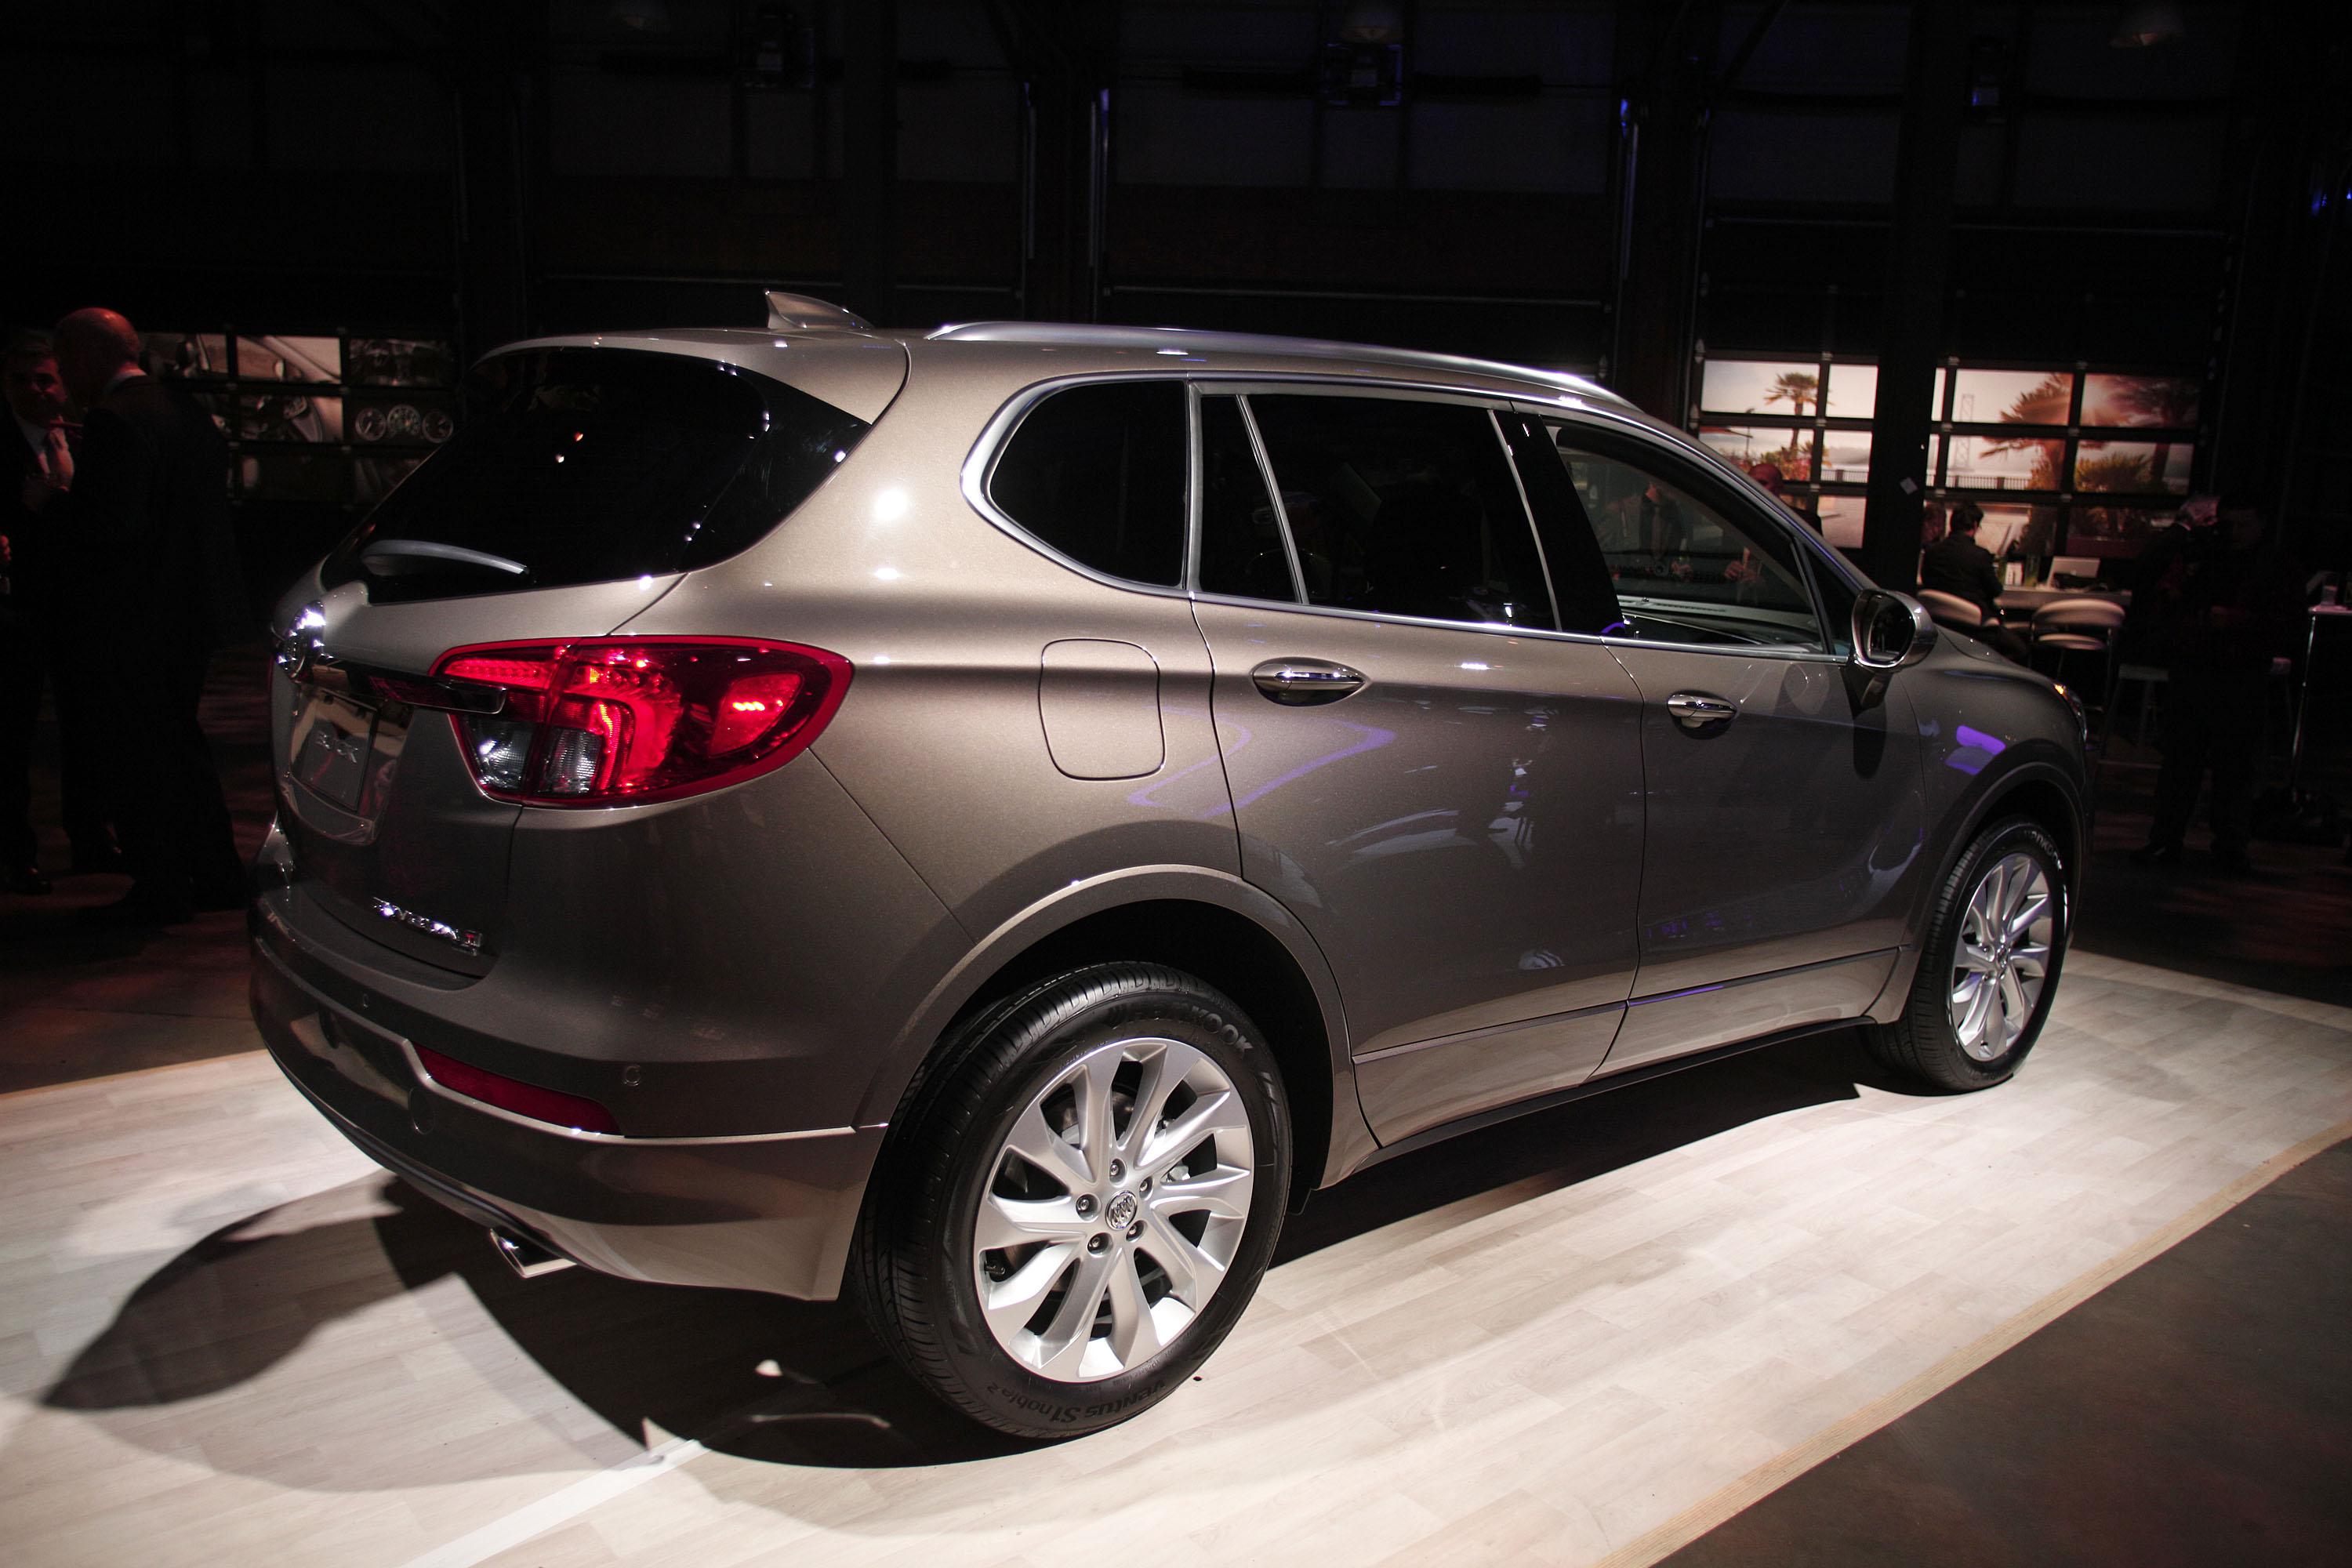 DETROIT, MI - JANUARY 10: The 2016 Buick Envision crossover SUV is shown at a Buick reveal event on the eve of the 2016 North American International Auto Show January 10th, 2016 in Detroit, Michigan. The Envision will be built in China and sold in the United States. The NAIAS runs from January 11th to January 24th and will feature over 750 vehicles and interactive displays.  (Photo by Bill Pugliano/Getty Images)